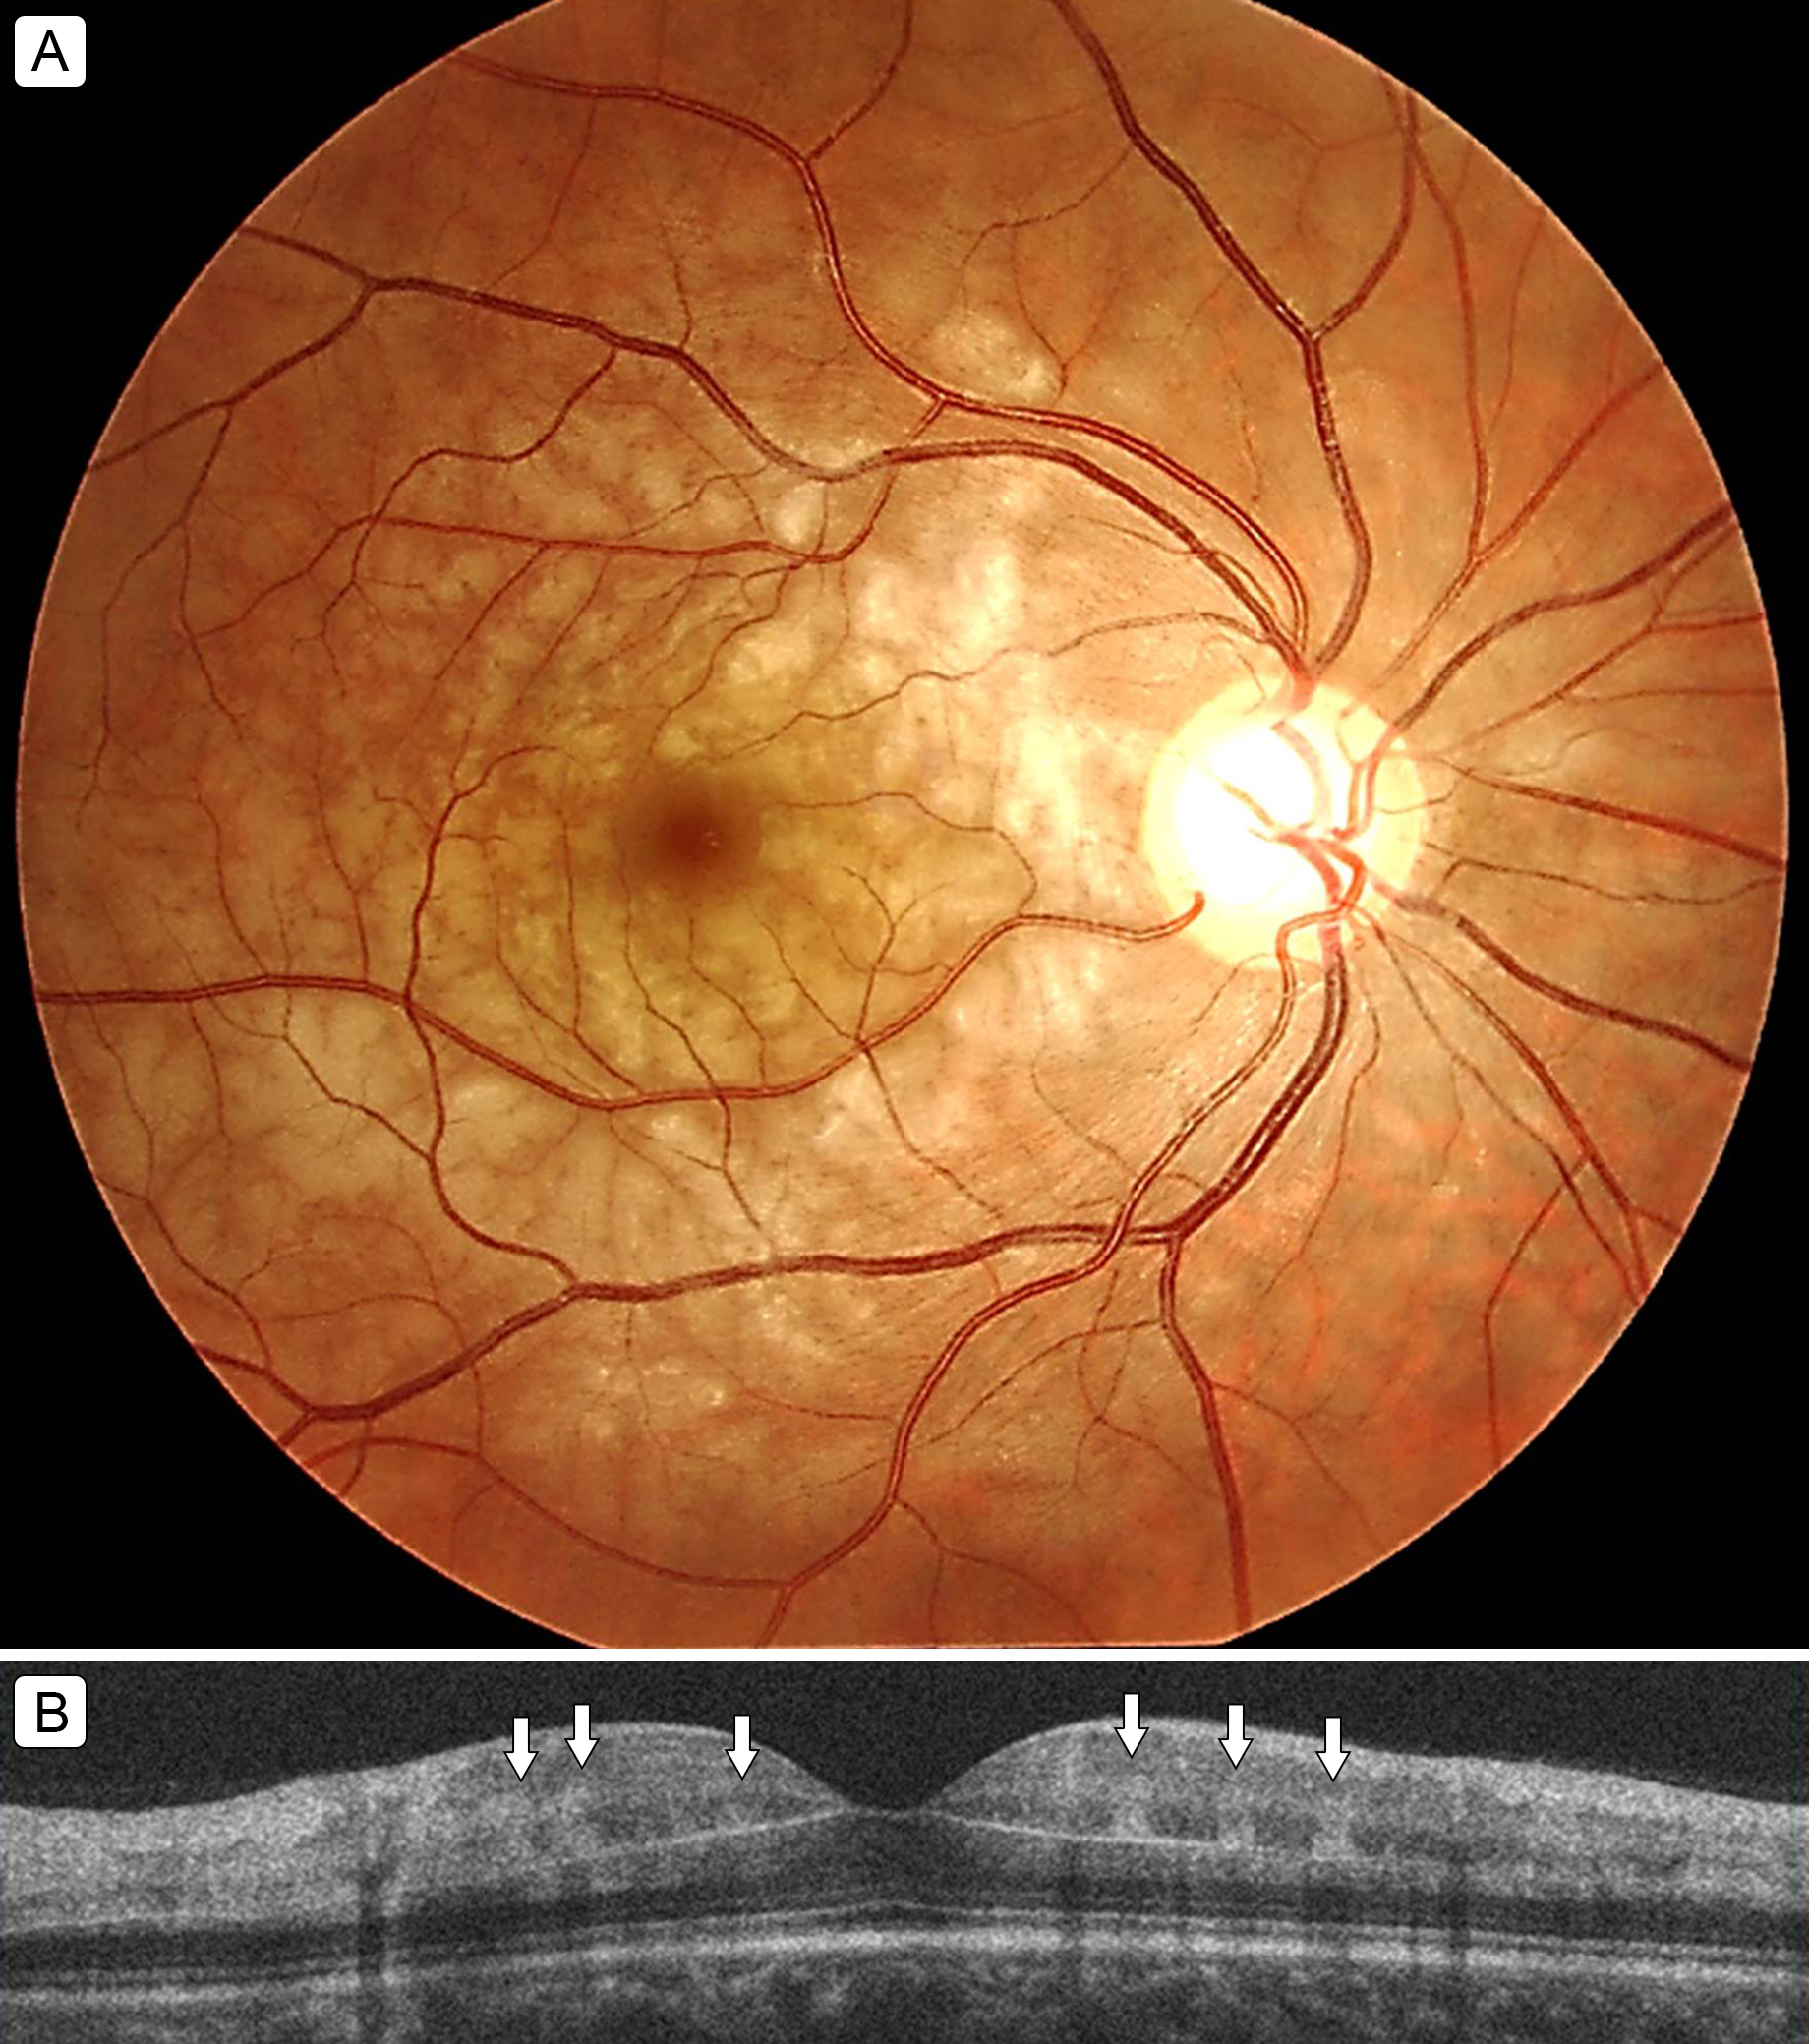 Ophthalmoscopic examination revealed fernlike retinal edema in the right eye (A); however, no cherry-red spot was detected. Optical coherence tomography showed hyperreflective bandlike lesions involving the middle layers of the retina at the level of the inner nuclear layer (B, arrows).